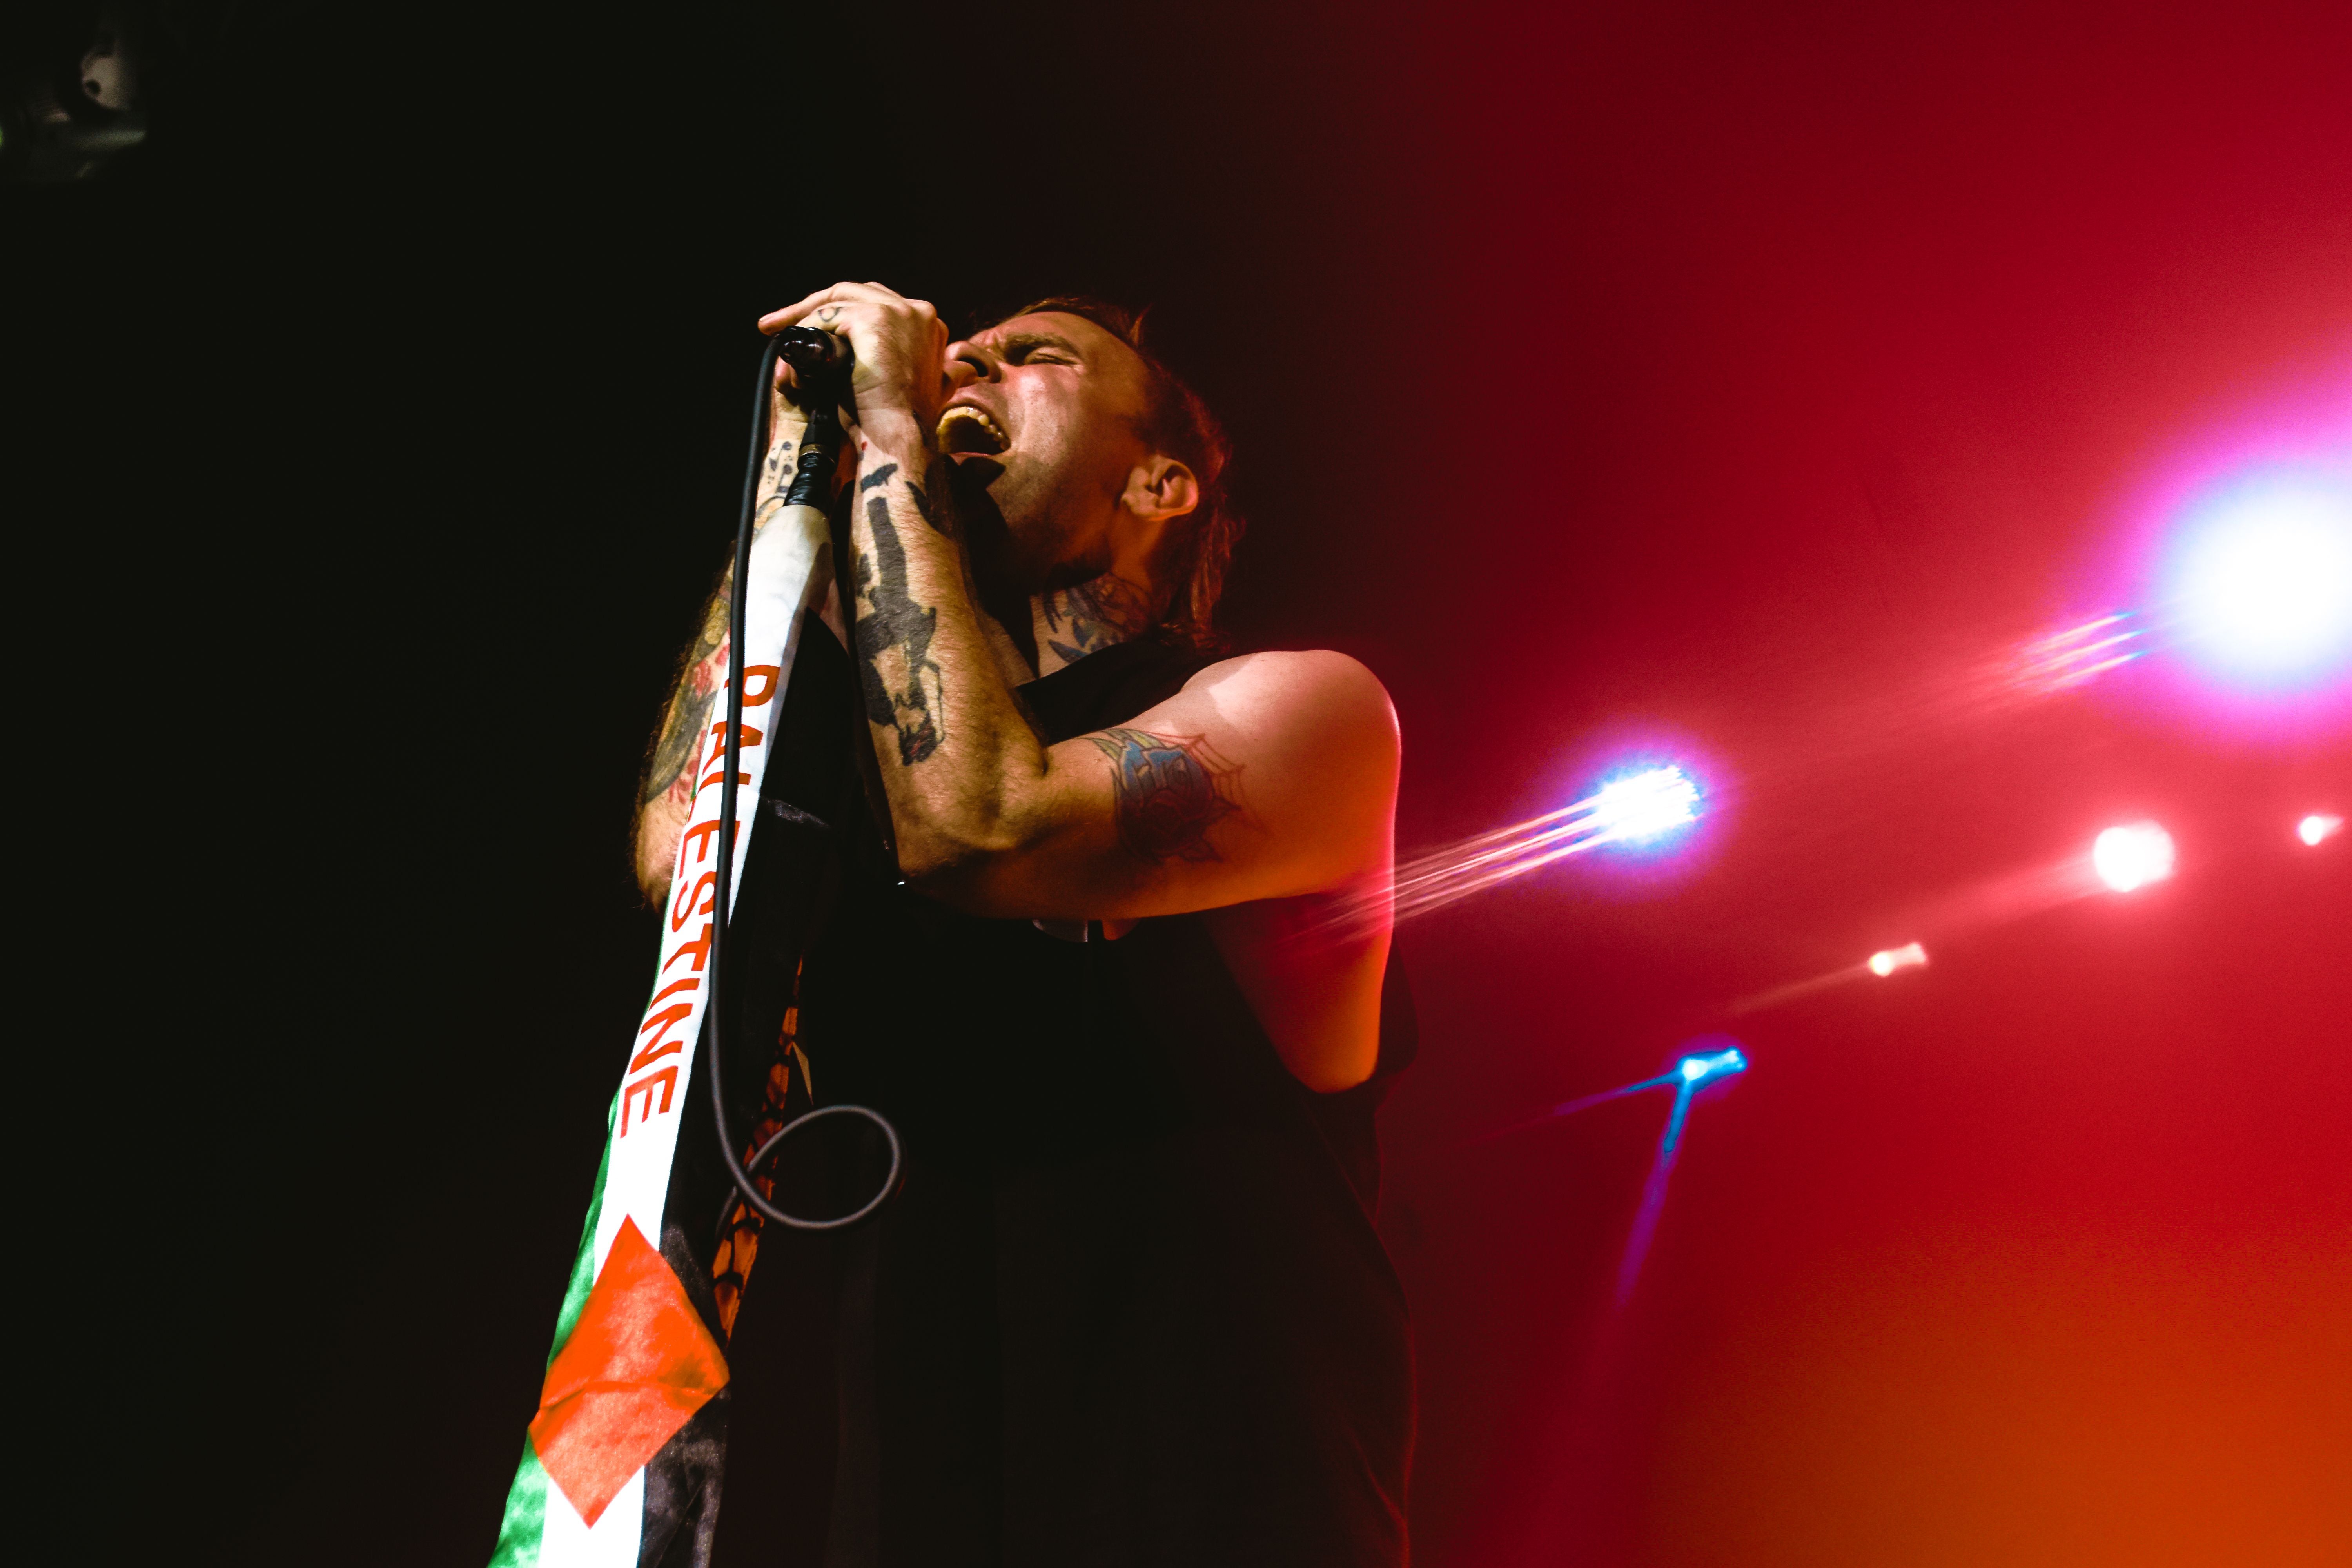 rise against the used tour